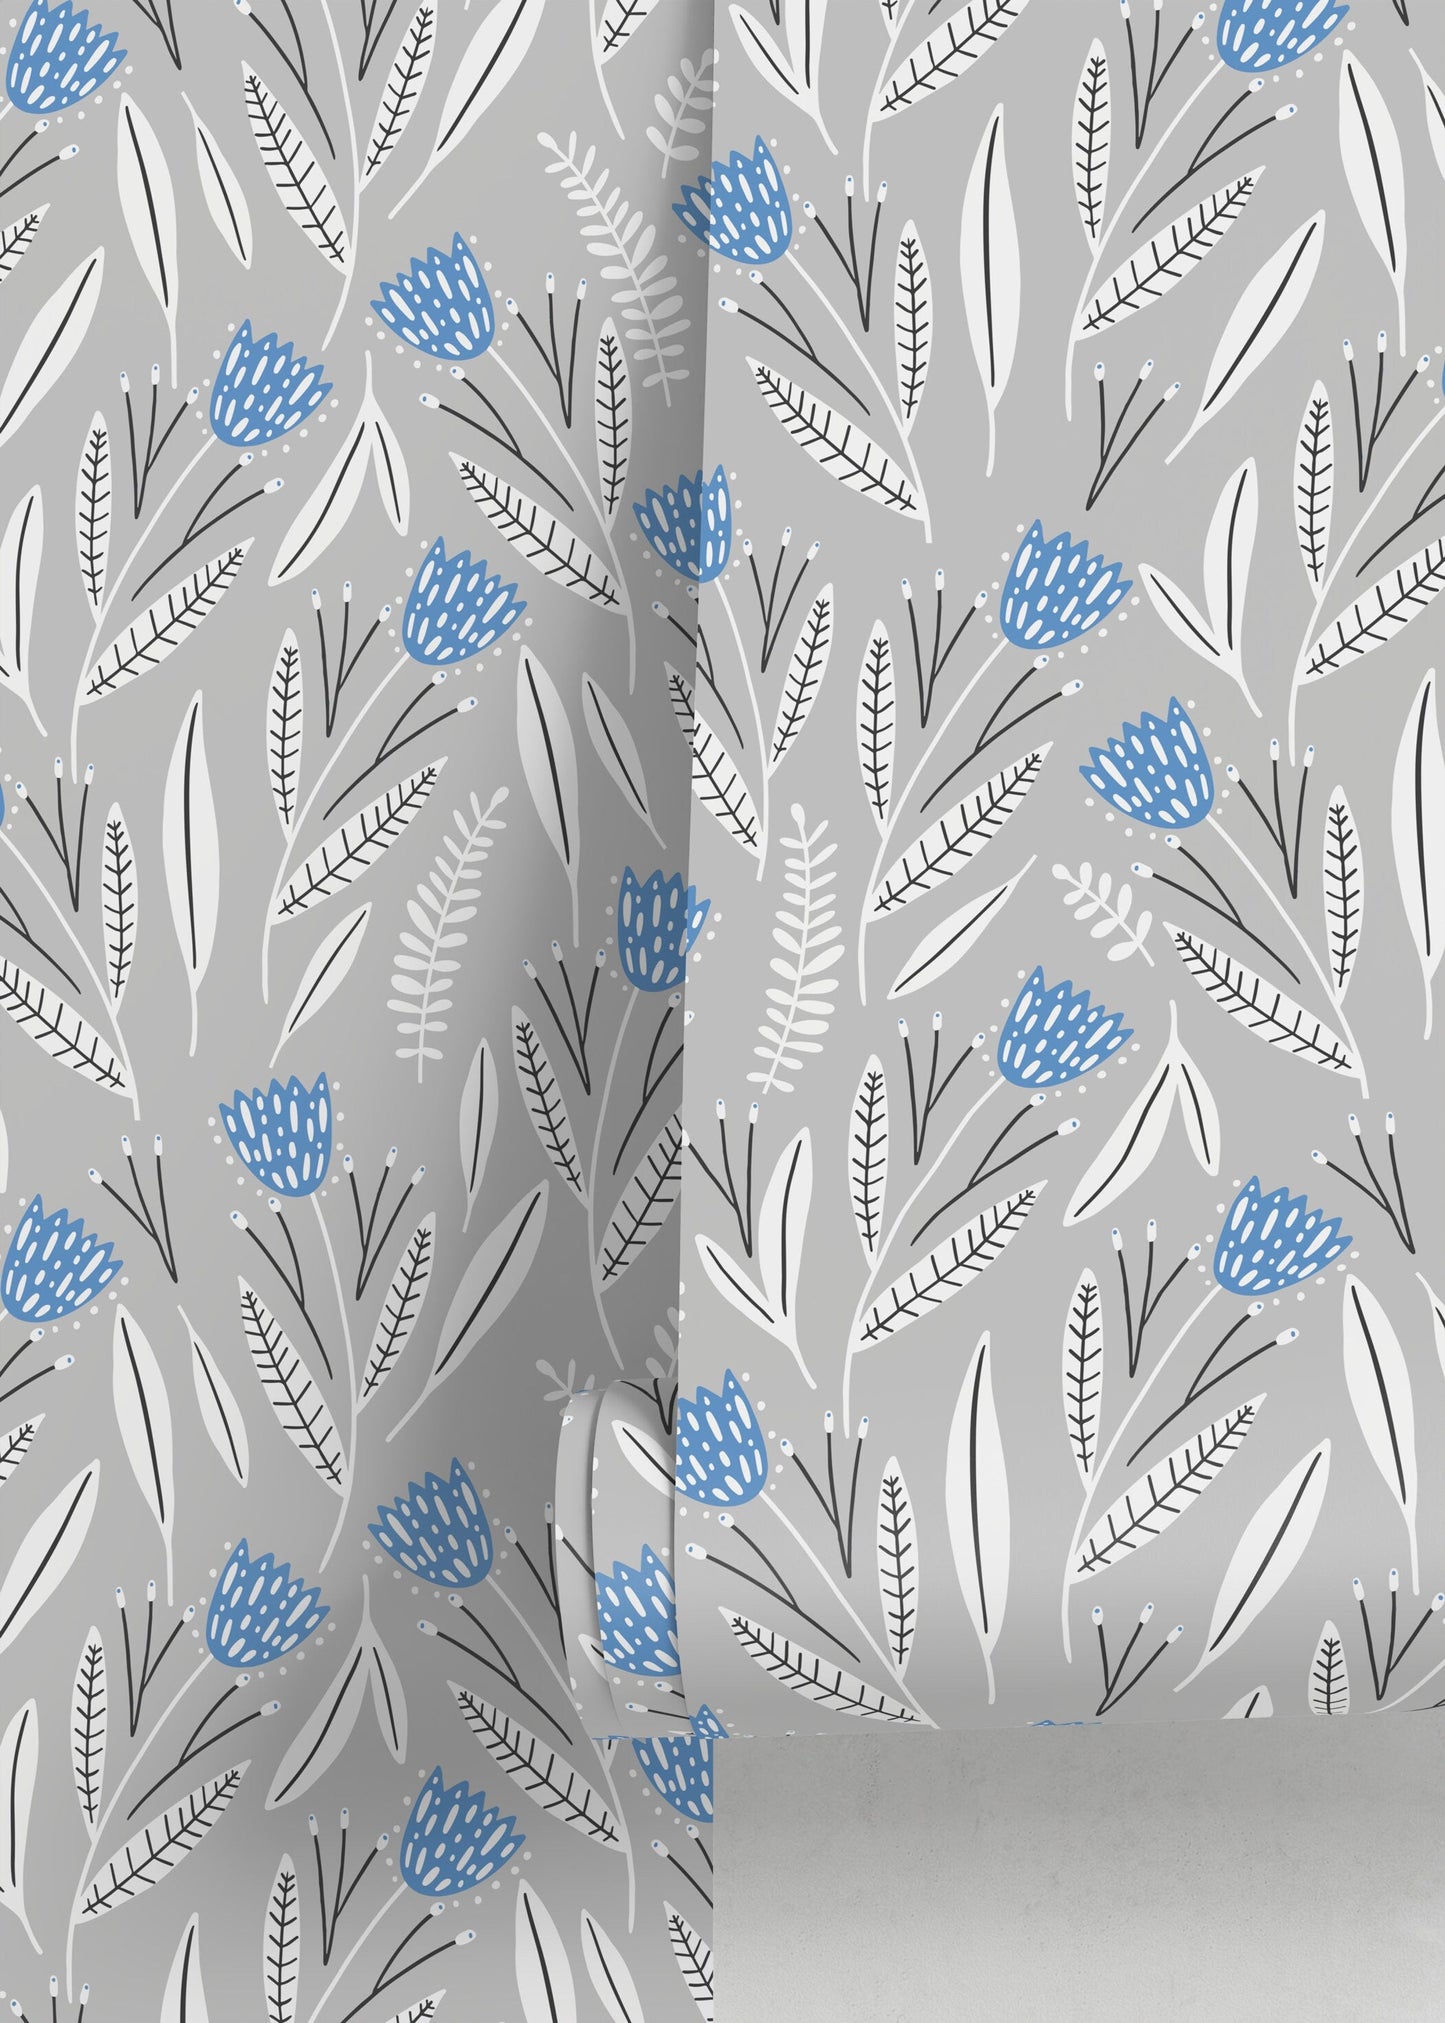 Blue and Gray Floral Wallpaper / Peel and Stick Wallpaper Removable Wallpaper Home Decor Wall Art Wall Decor Room Decor - D388